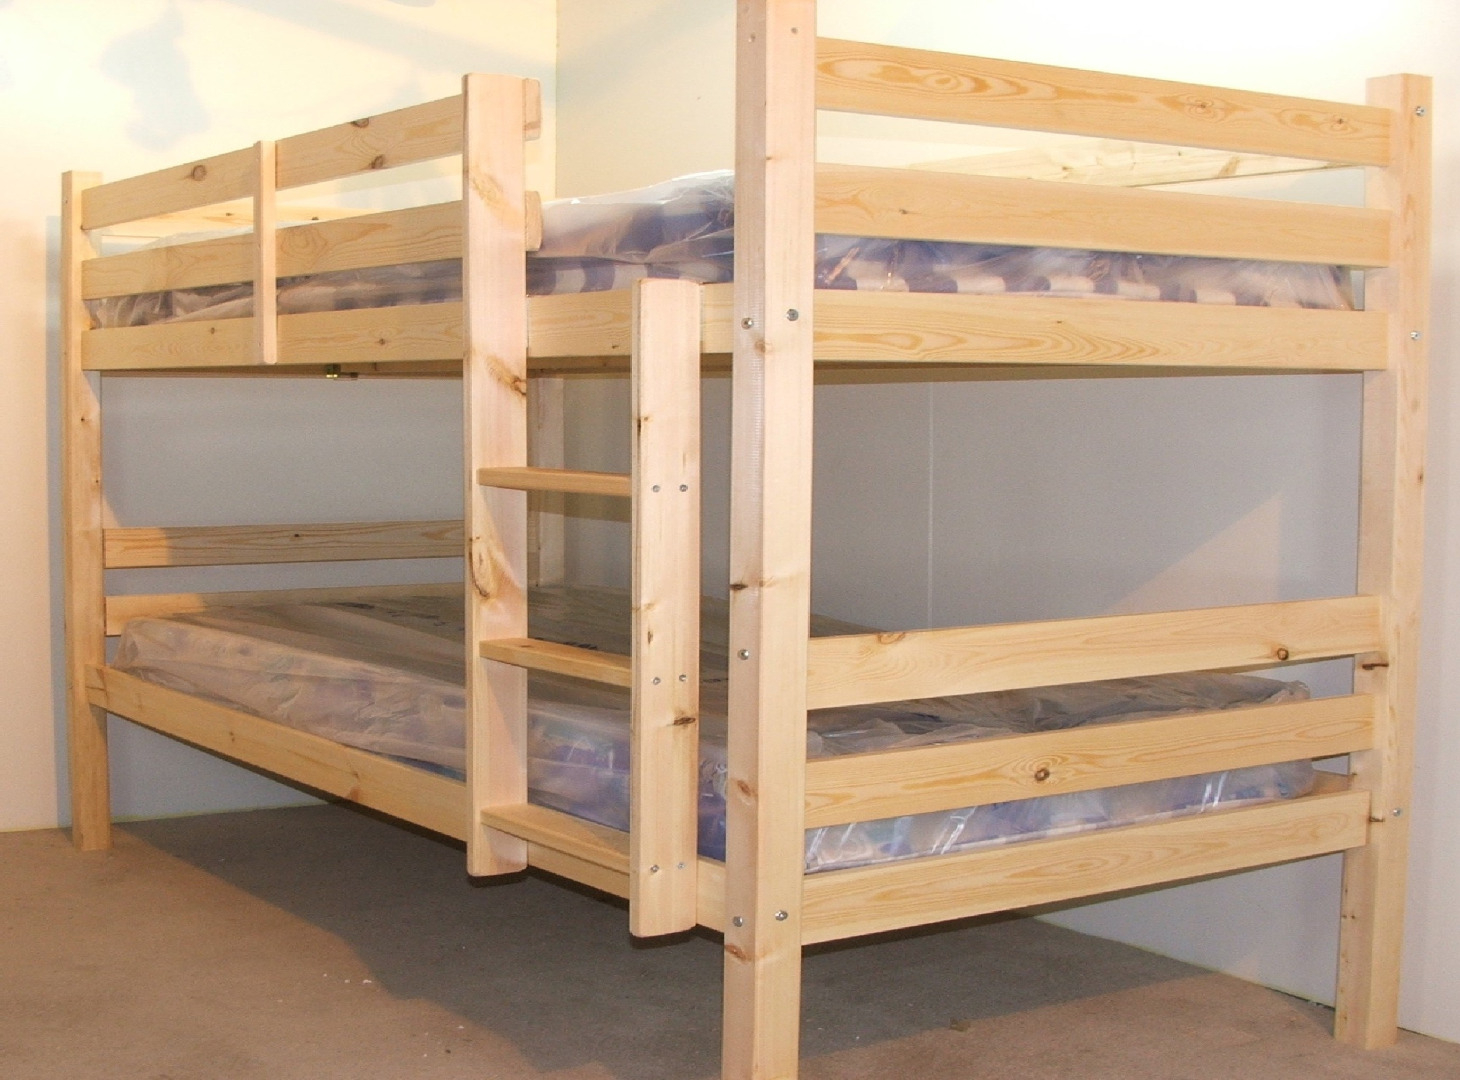 Heavy Duty Bunk Beds Visualhunt, Habitat Heavy Duty Bunk Bed Frame White And Pine